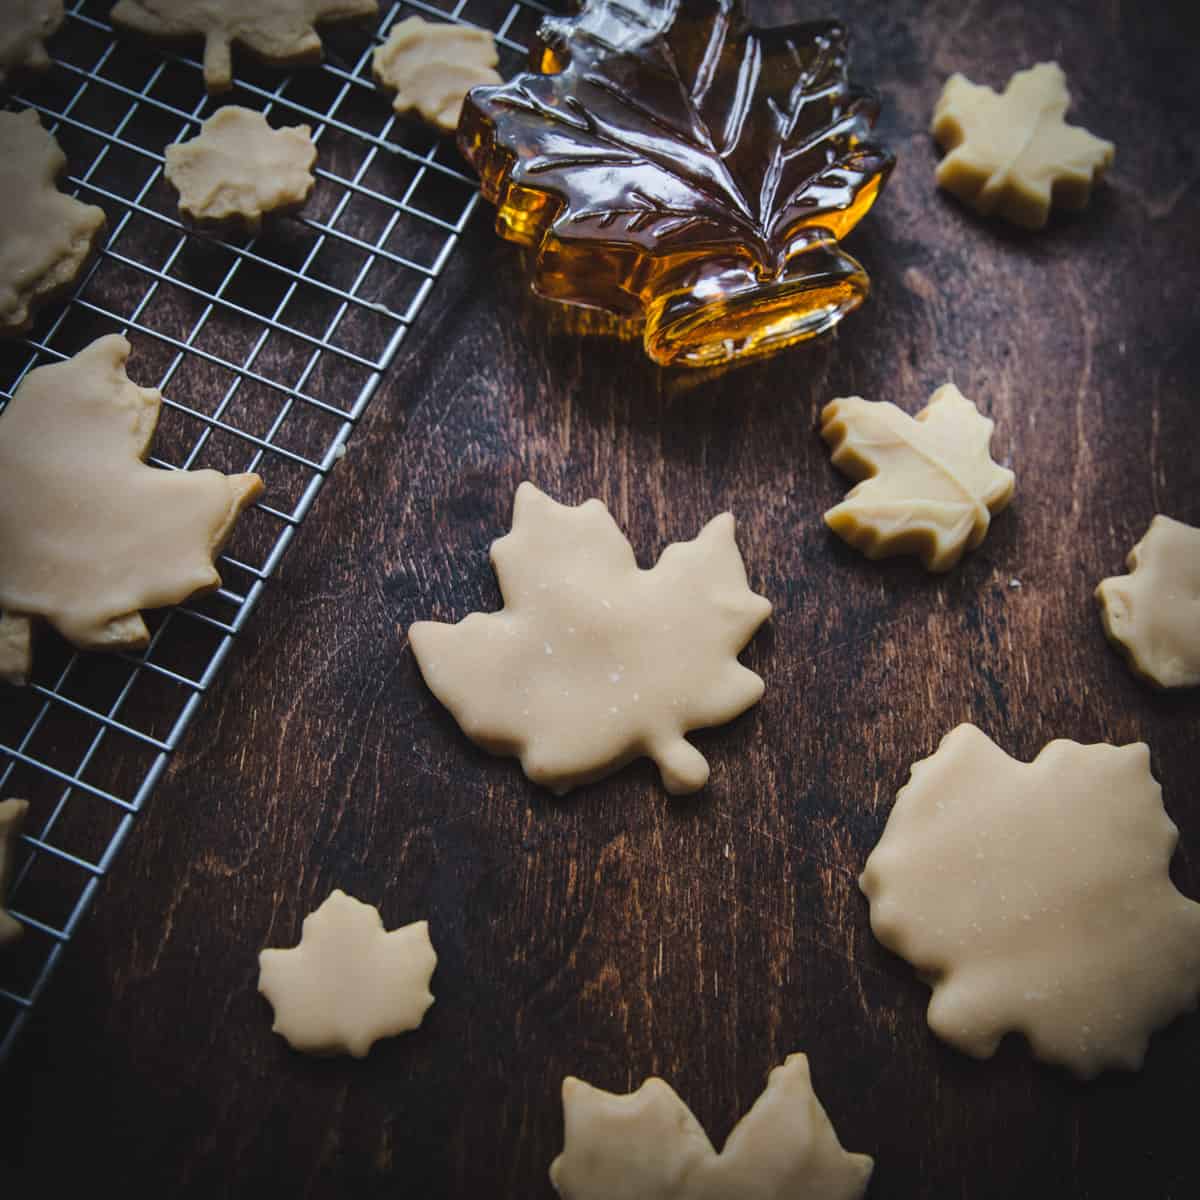 Maple leaf shaped cookies of different sizes on a dark wood surface, some on a cooling rack, along with maple syrup in a maple shaped glass container. 